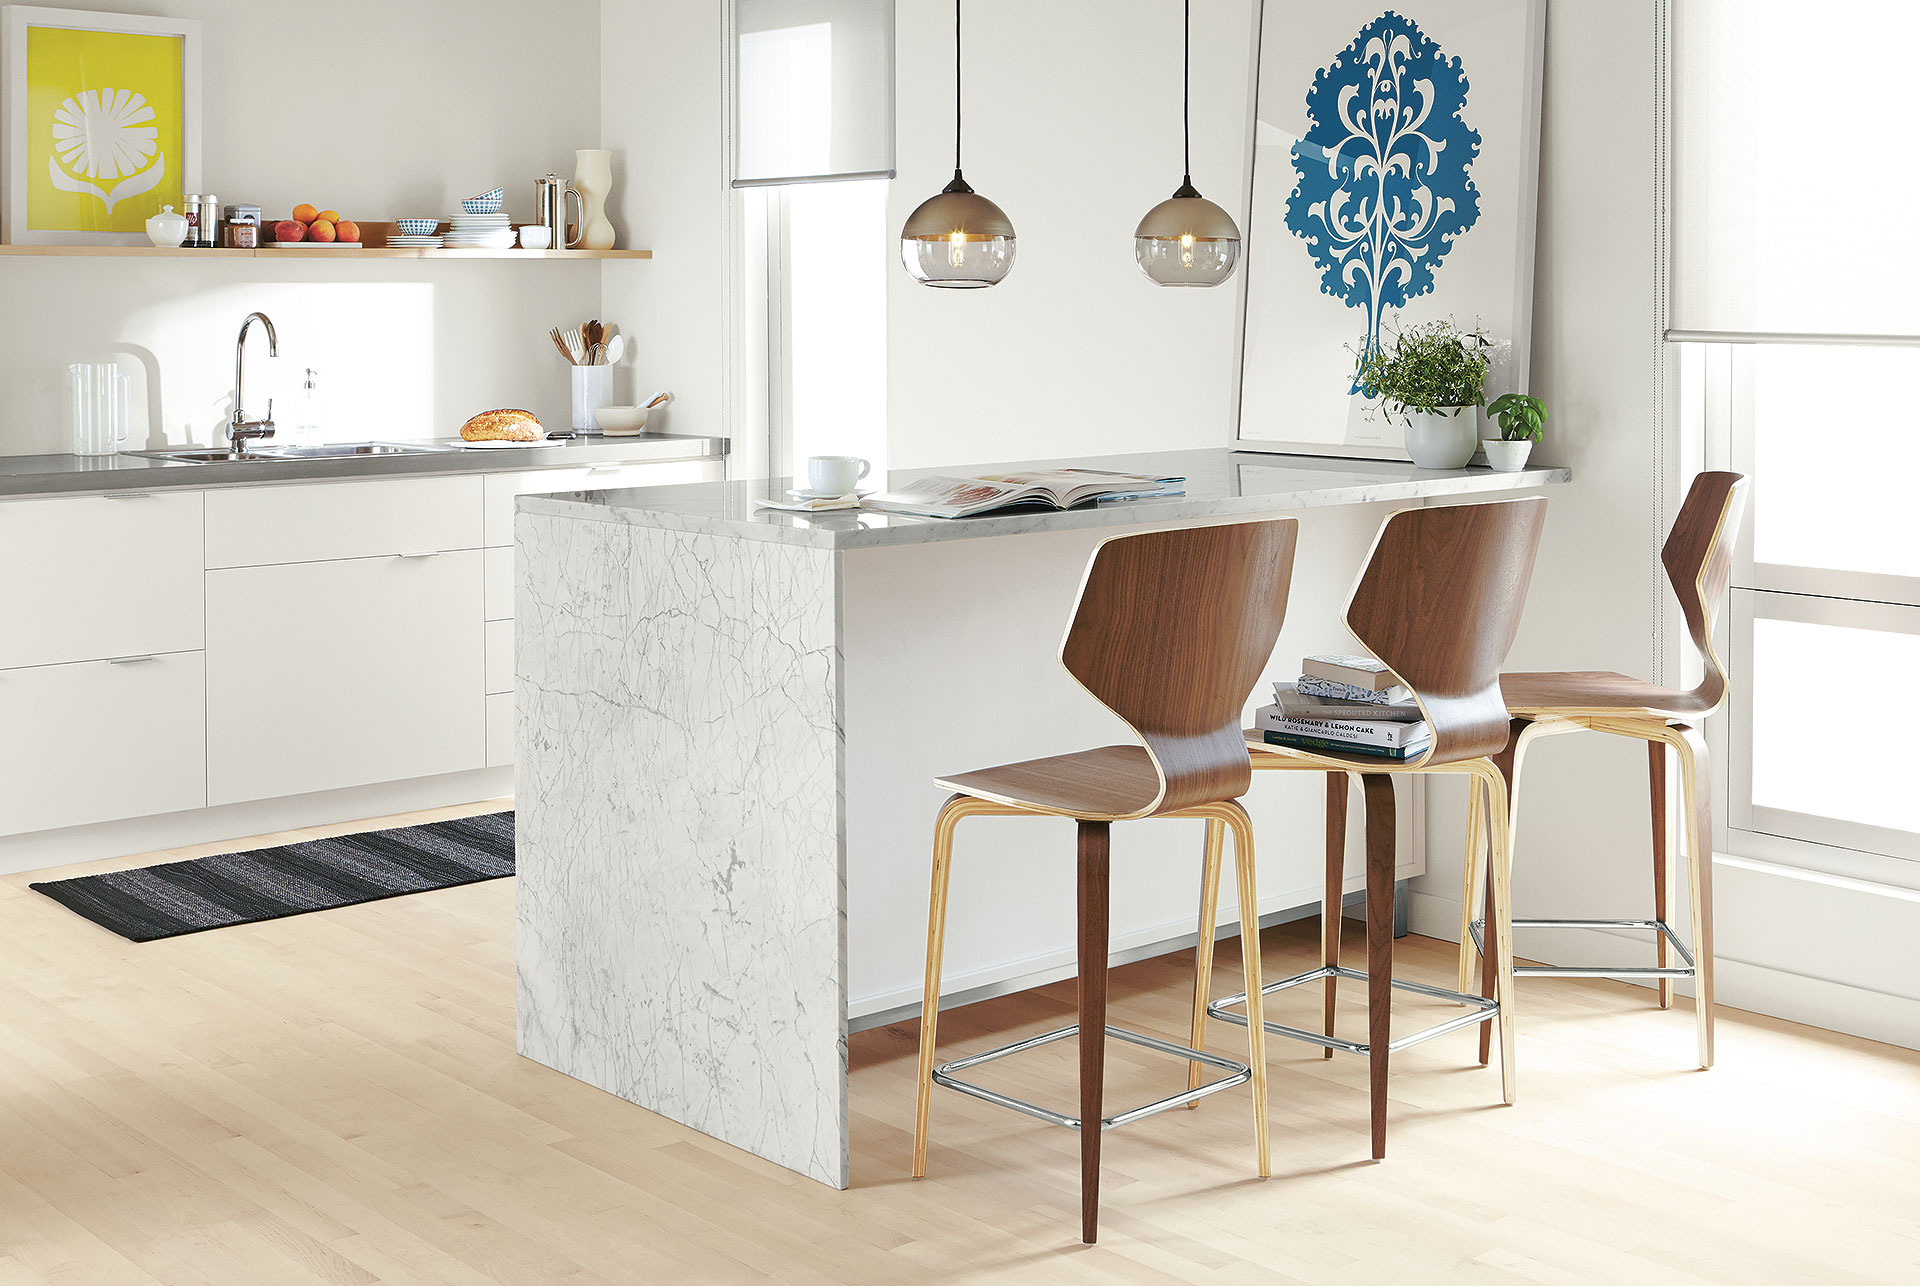 How To Choose Counter Bar Stools, Best Bar Stool Height For Kitchen Island